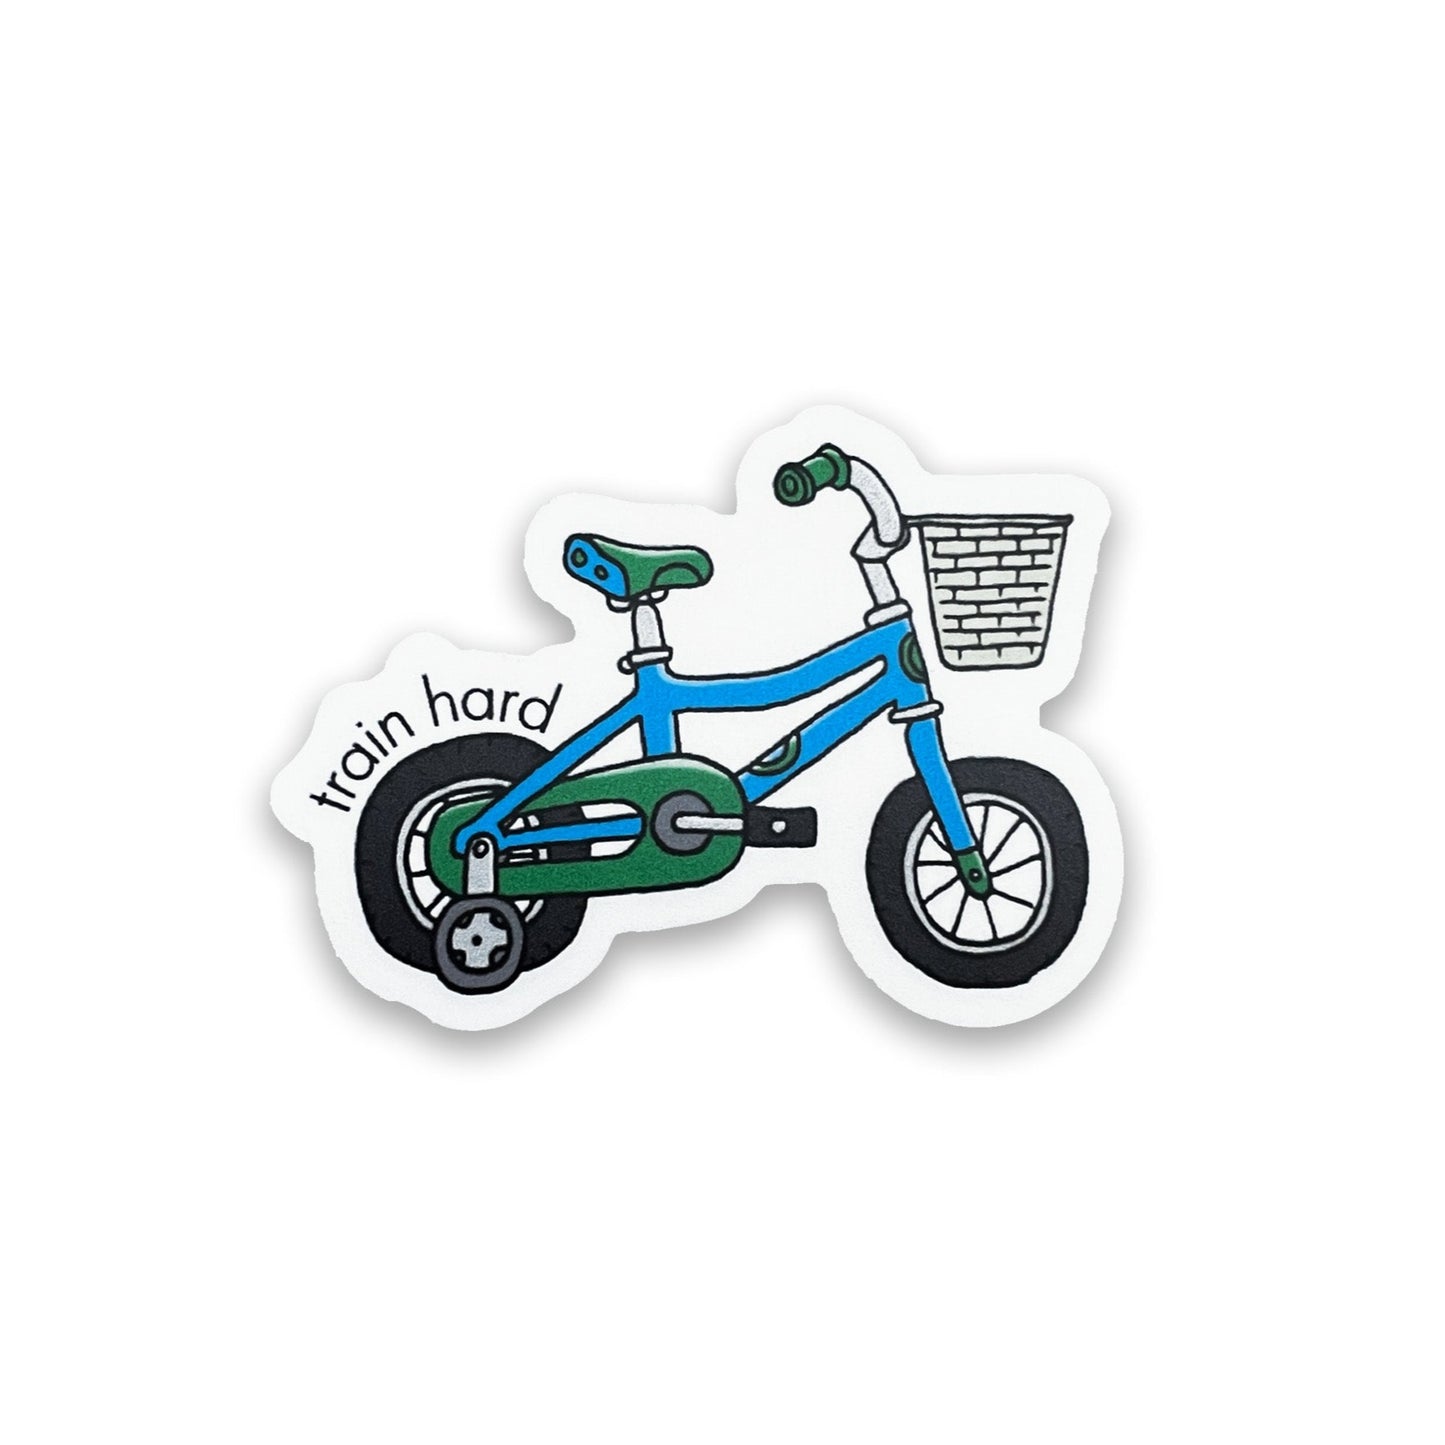 Blue and green tricycle sticker with punny saying, train hard on the front. Durable enough for cyclist, mountain biker, gravel bike, zwift, peleton, triathlon. Vinyl sticker for hydroflask, nalgene, yeti, laptop, window